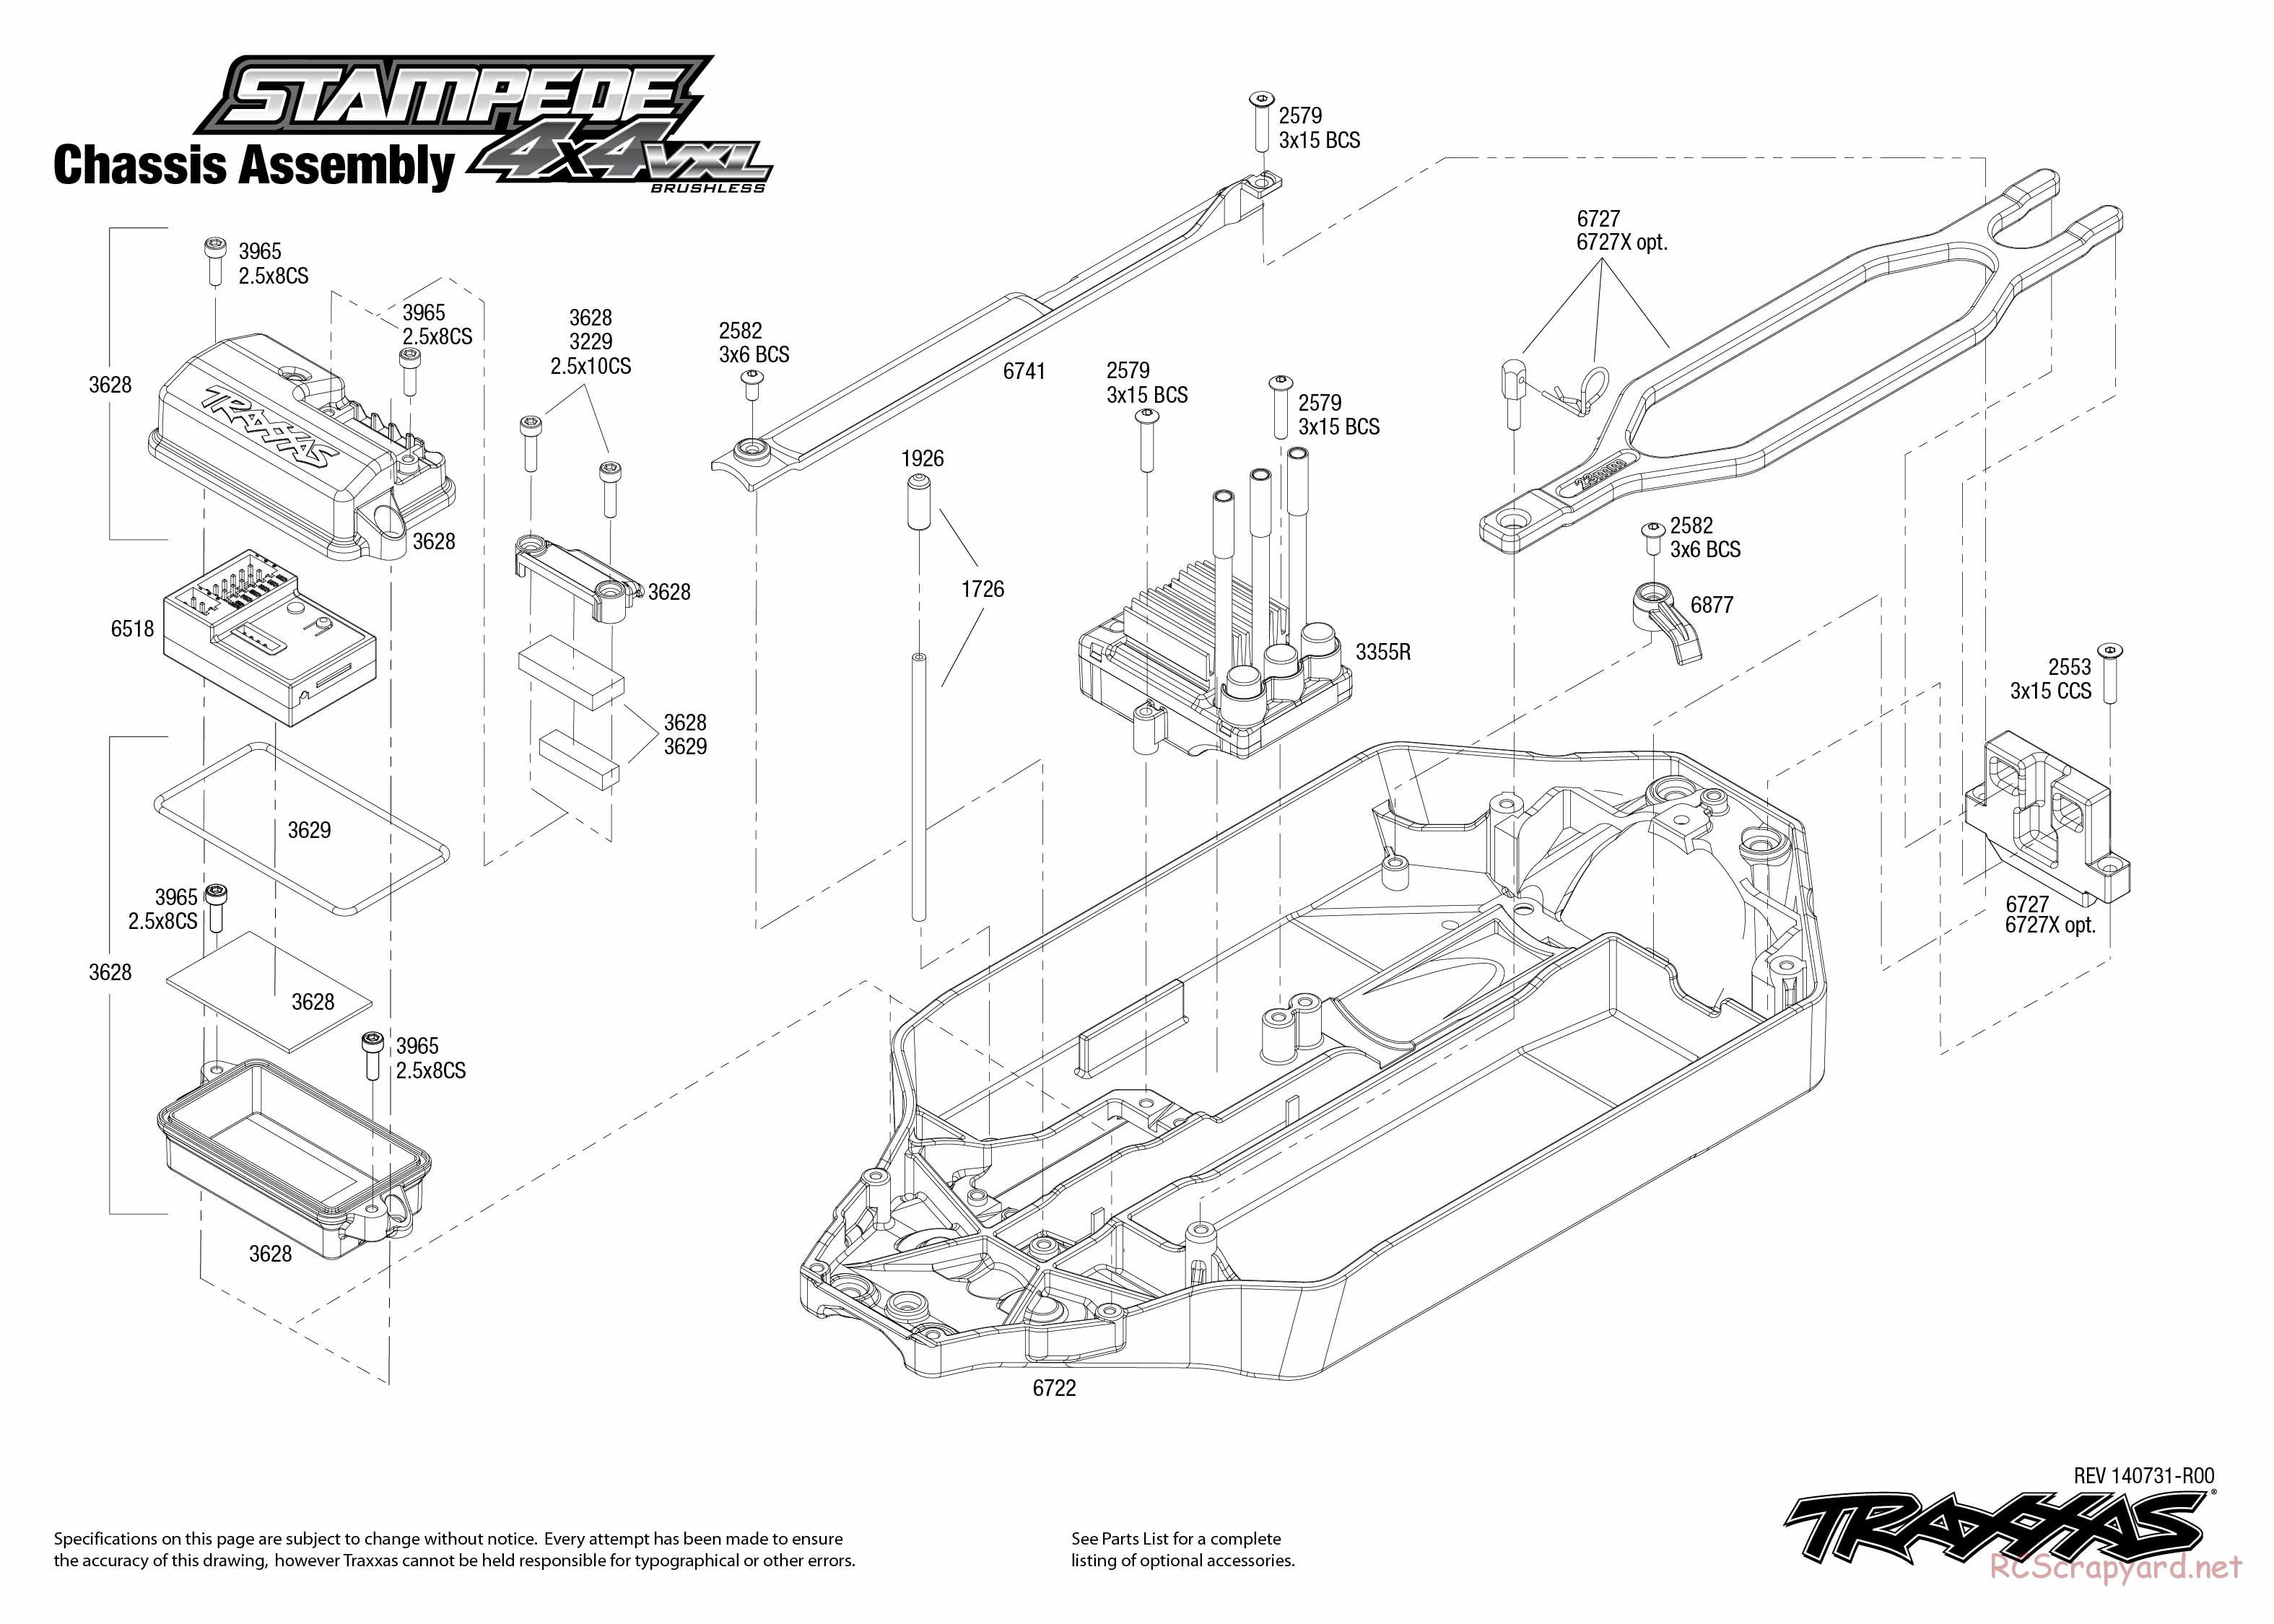 Traxxas - Stampede 4x4 VXL (2015) - Exploded Views - Page 1